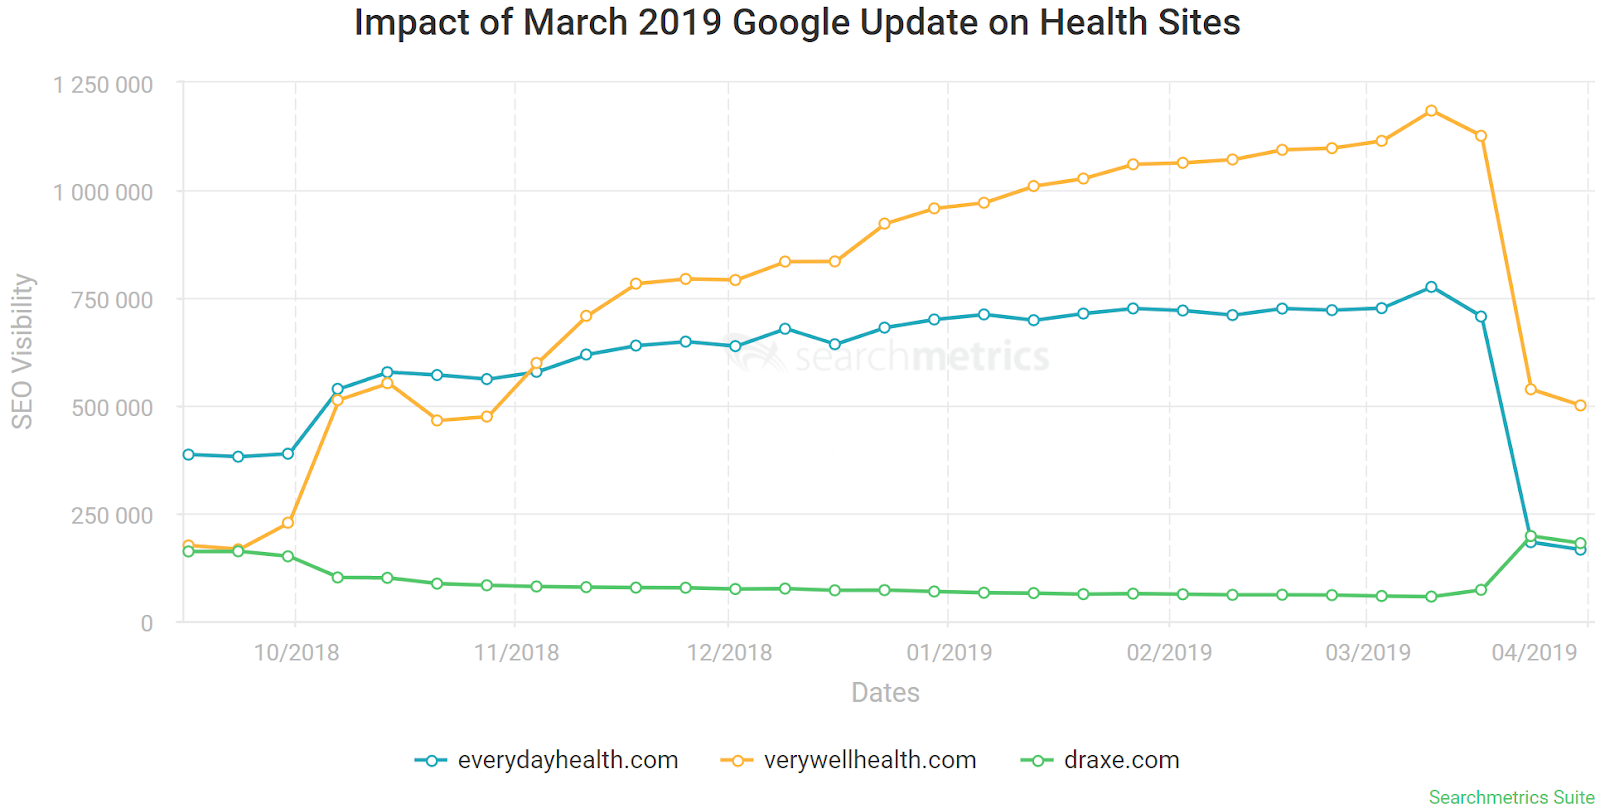 Impact of March 2019 Google Update on Health Sites